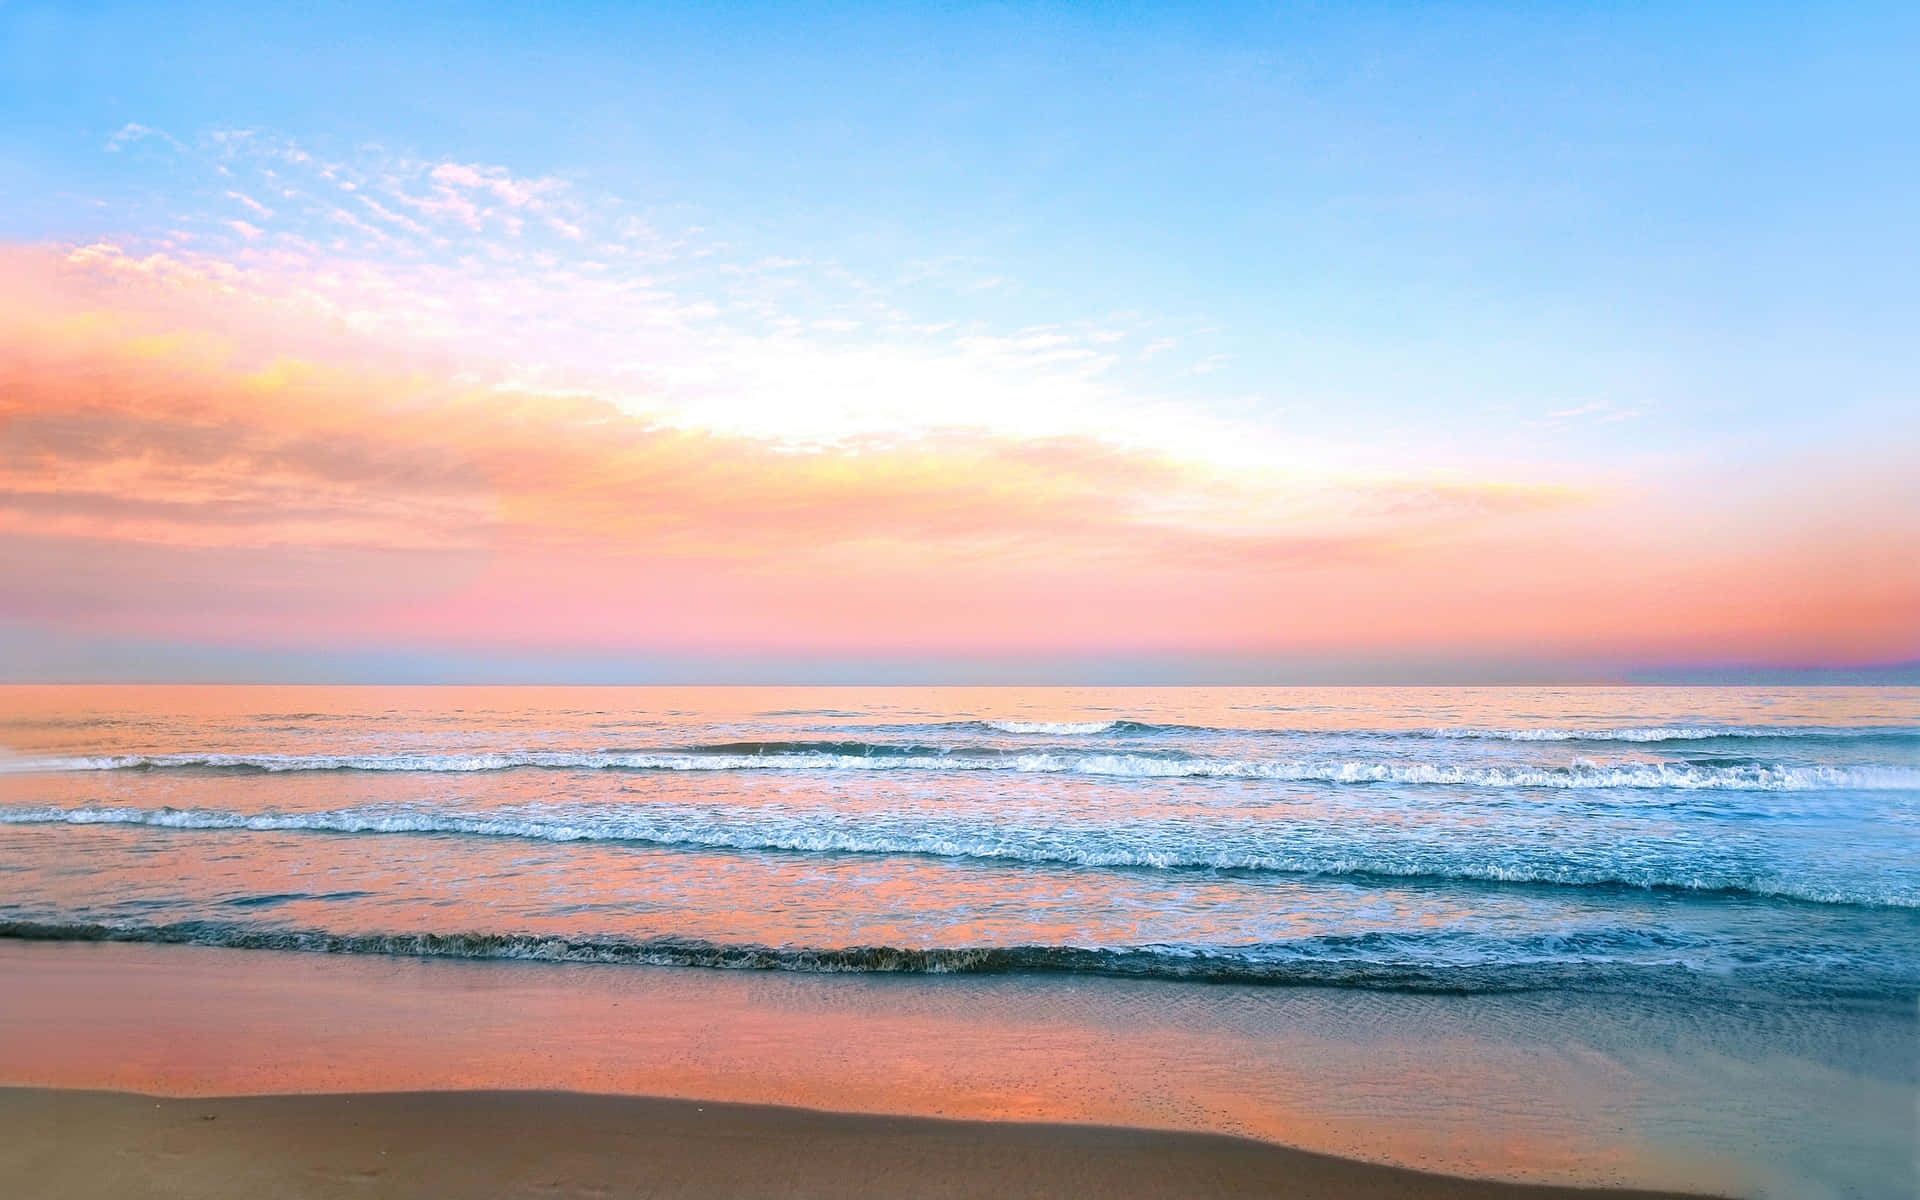 Enjoying the serenity of a picturesque pastel beach. Wallpaper